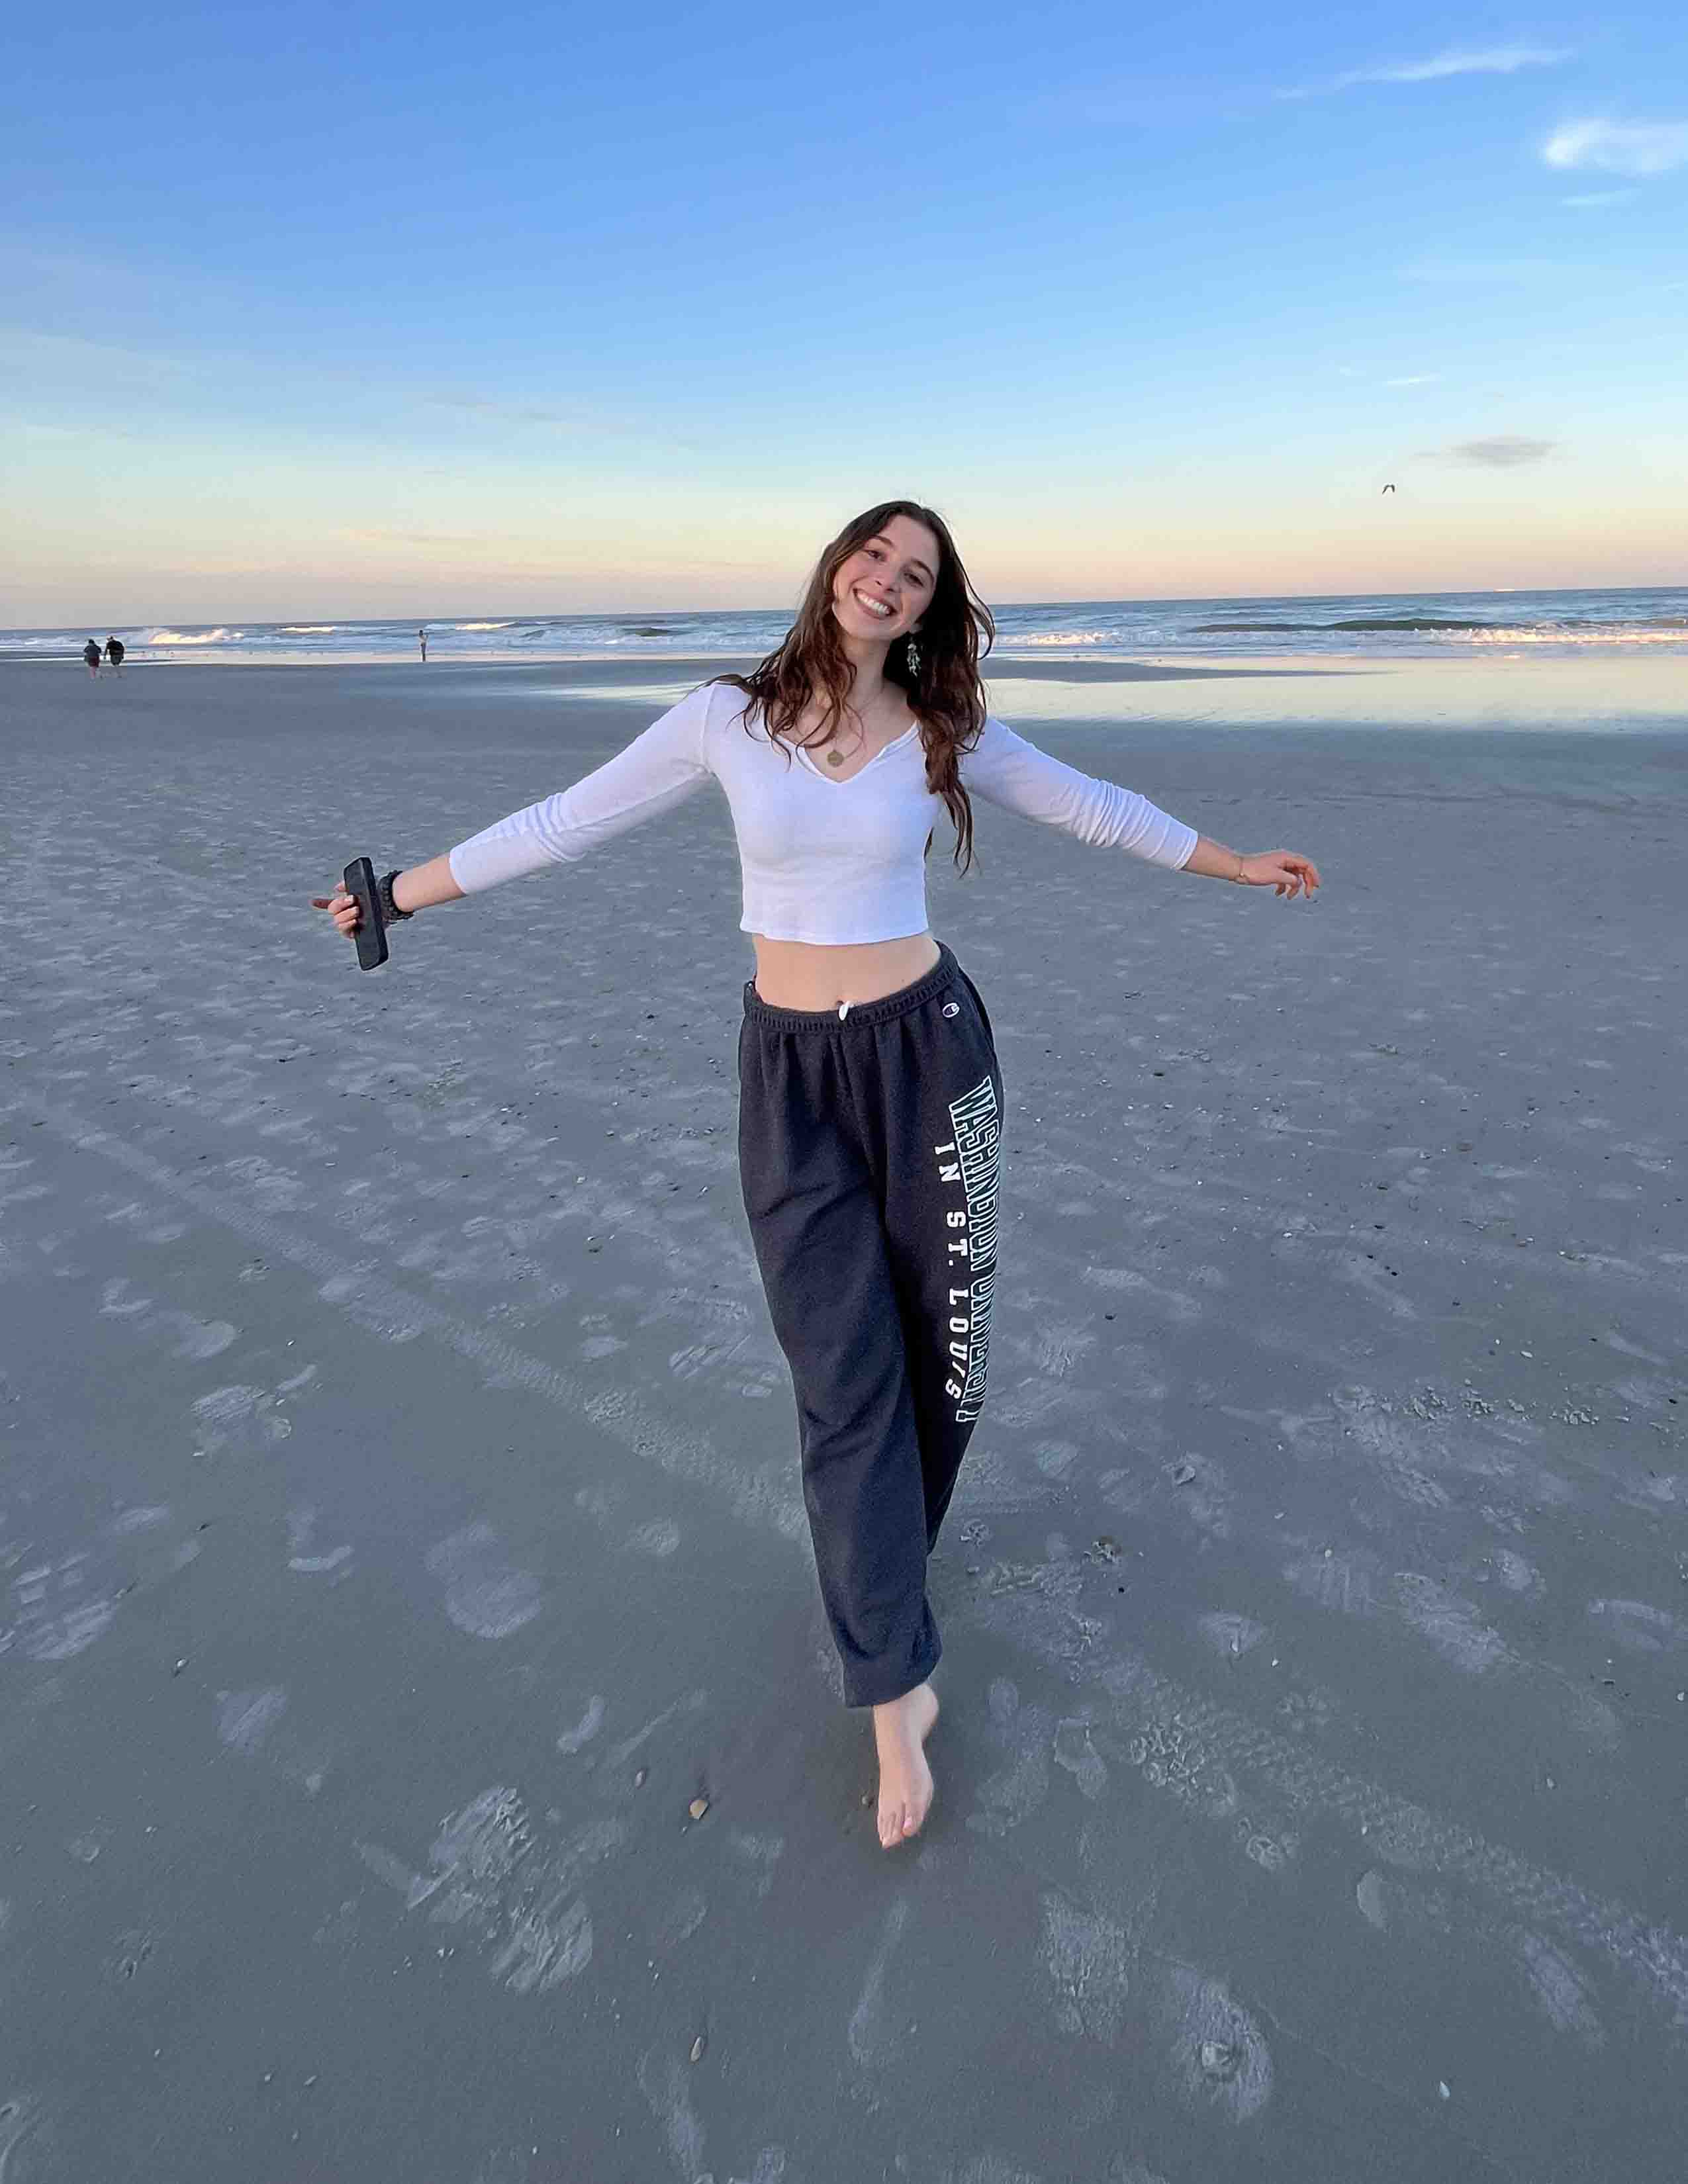 Olivia Rosen posing on the beach with the ocean behind her.